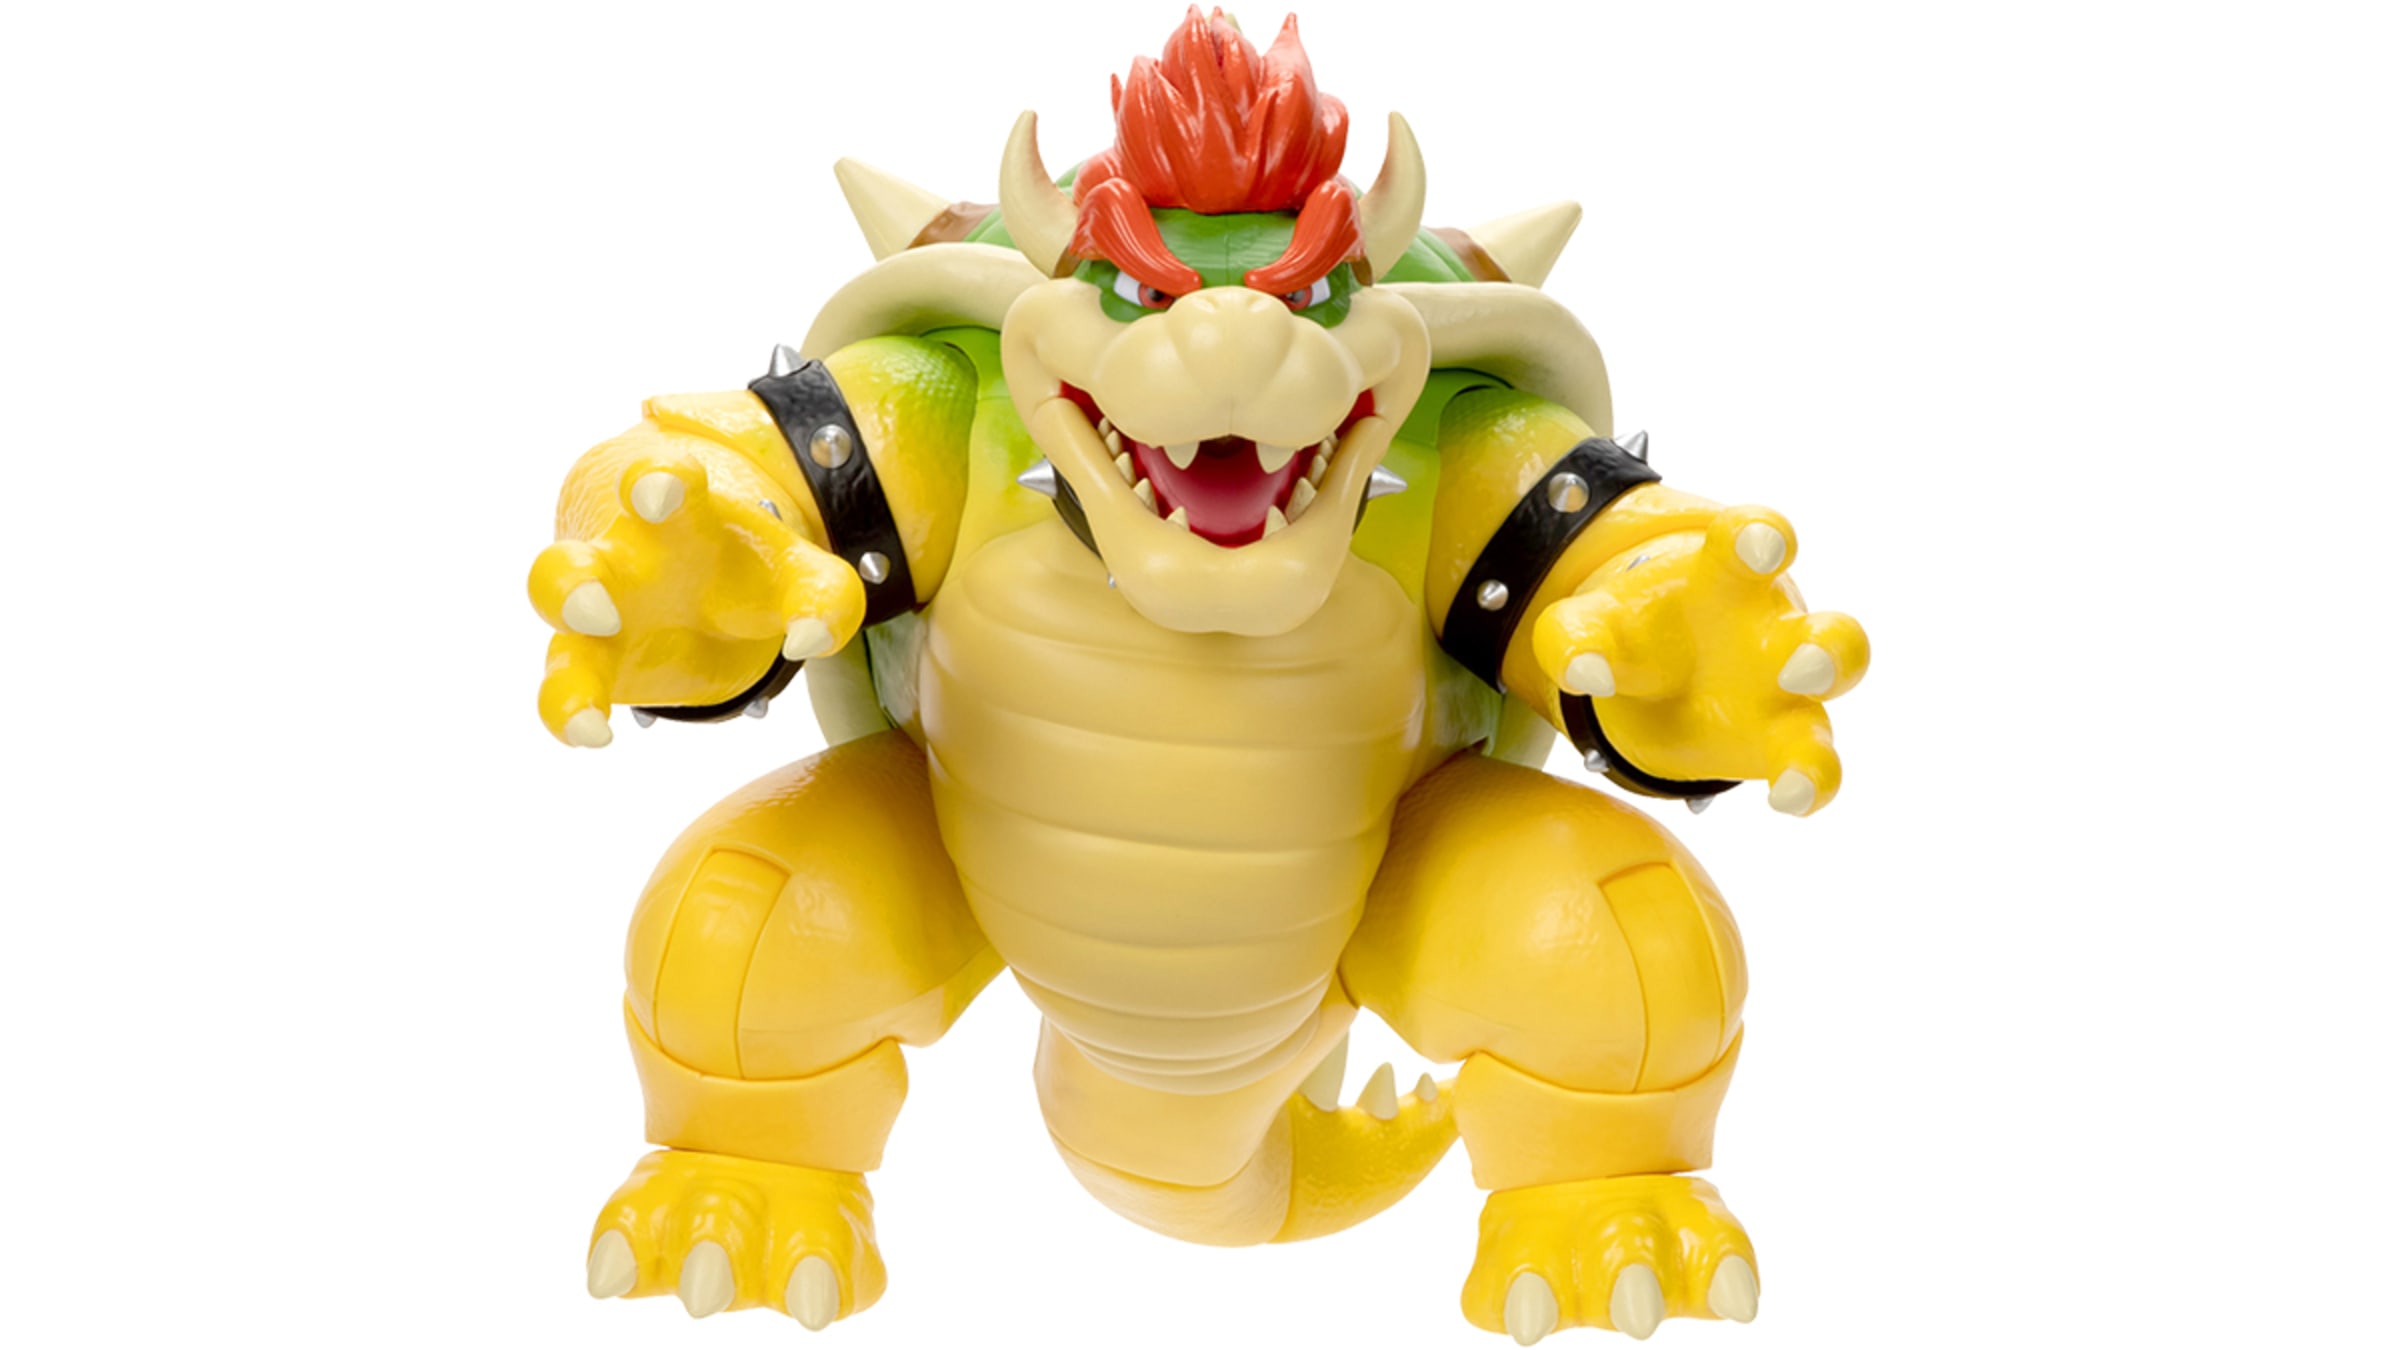 The Super Mario Bros. Movie – 7” Feature Bowser with Fire Breathing Effects  - Nintendo Official Site